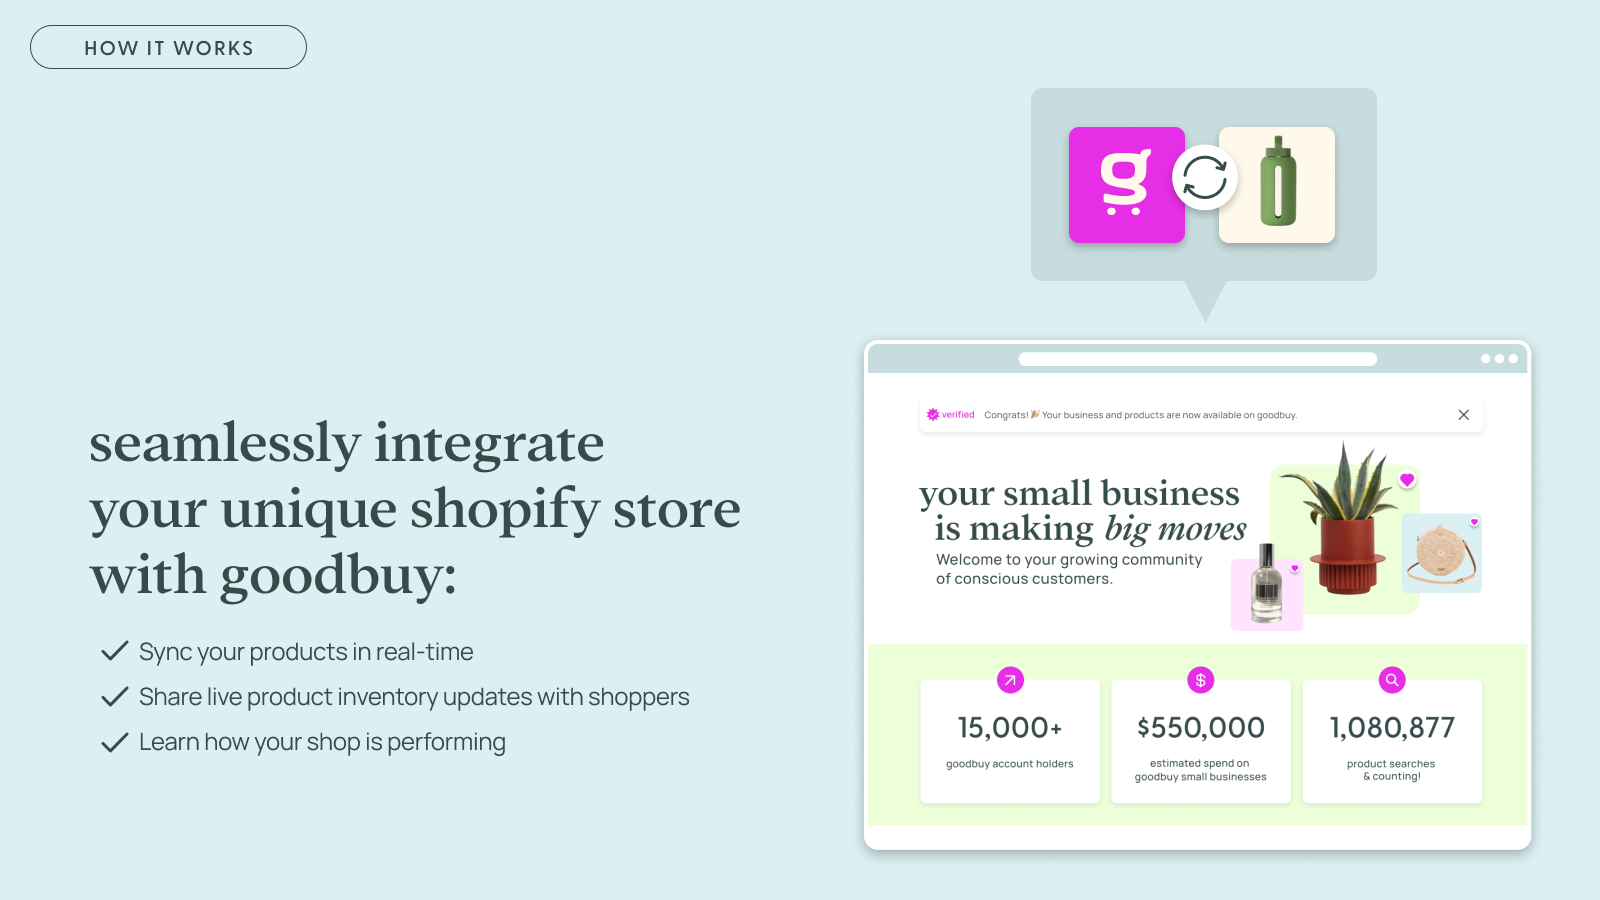 seamlessly integrate your unique shopify store with goodbuy: